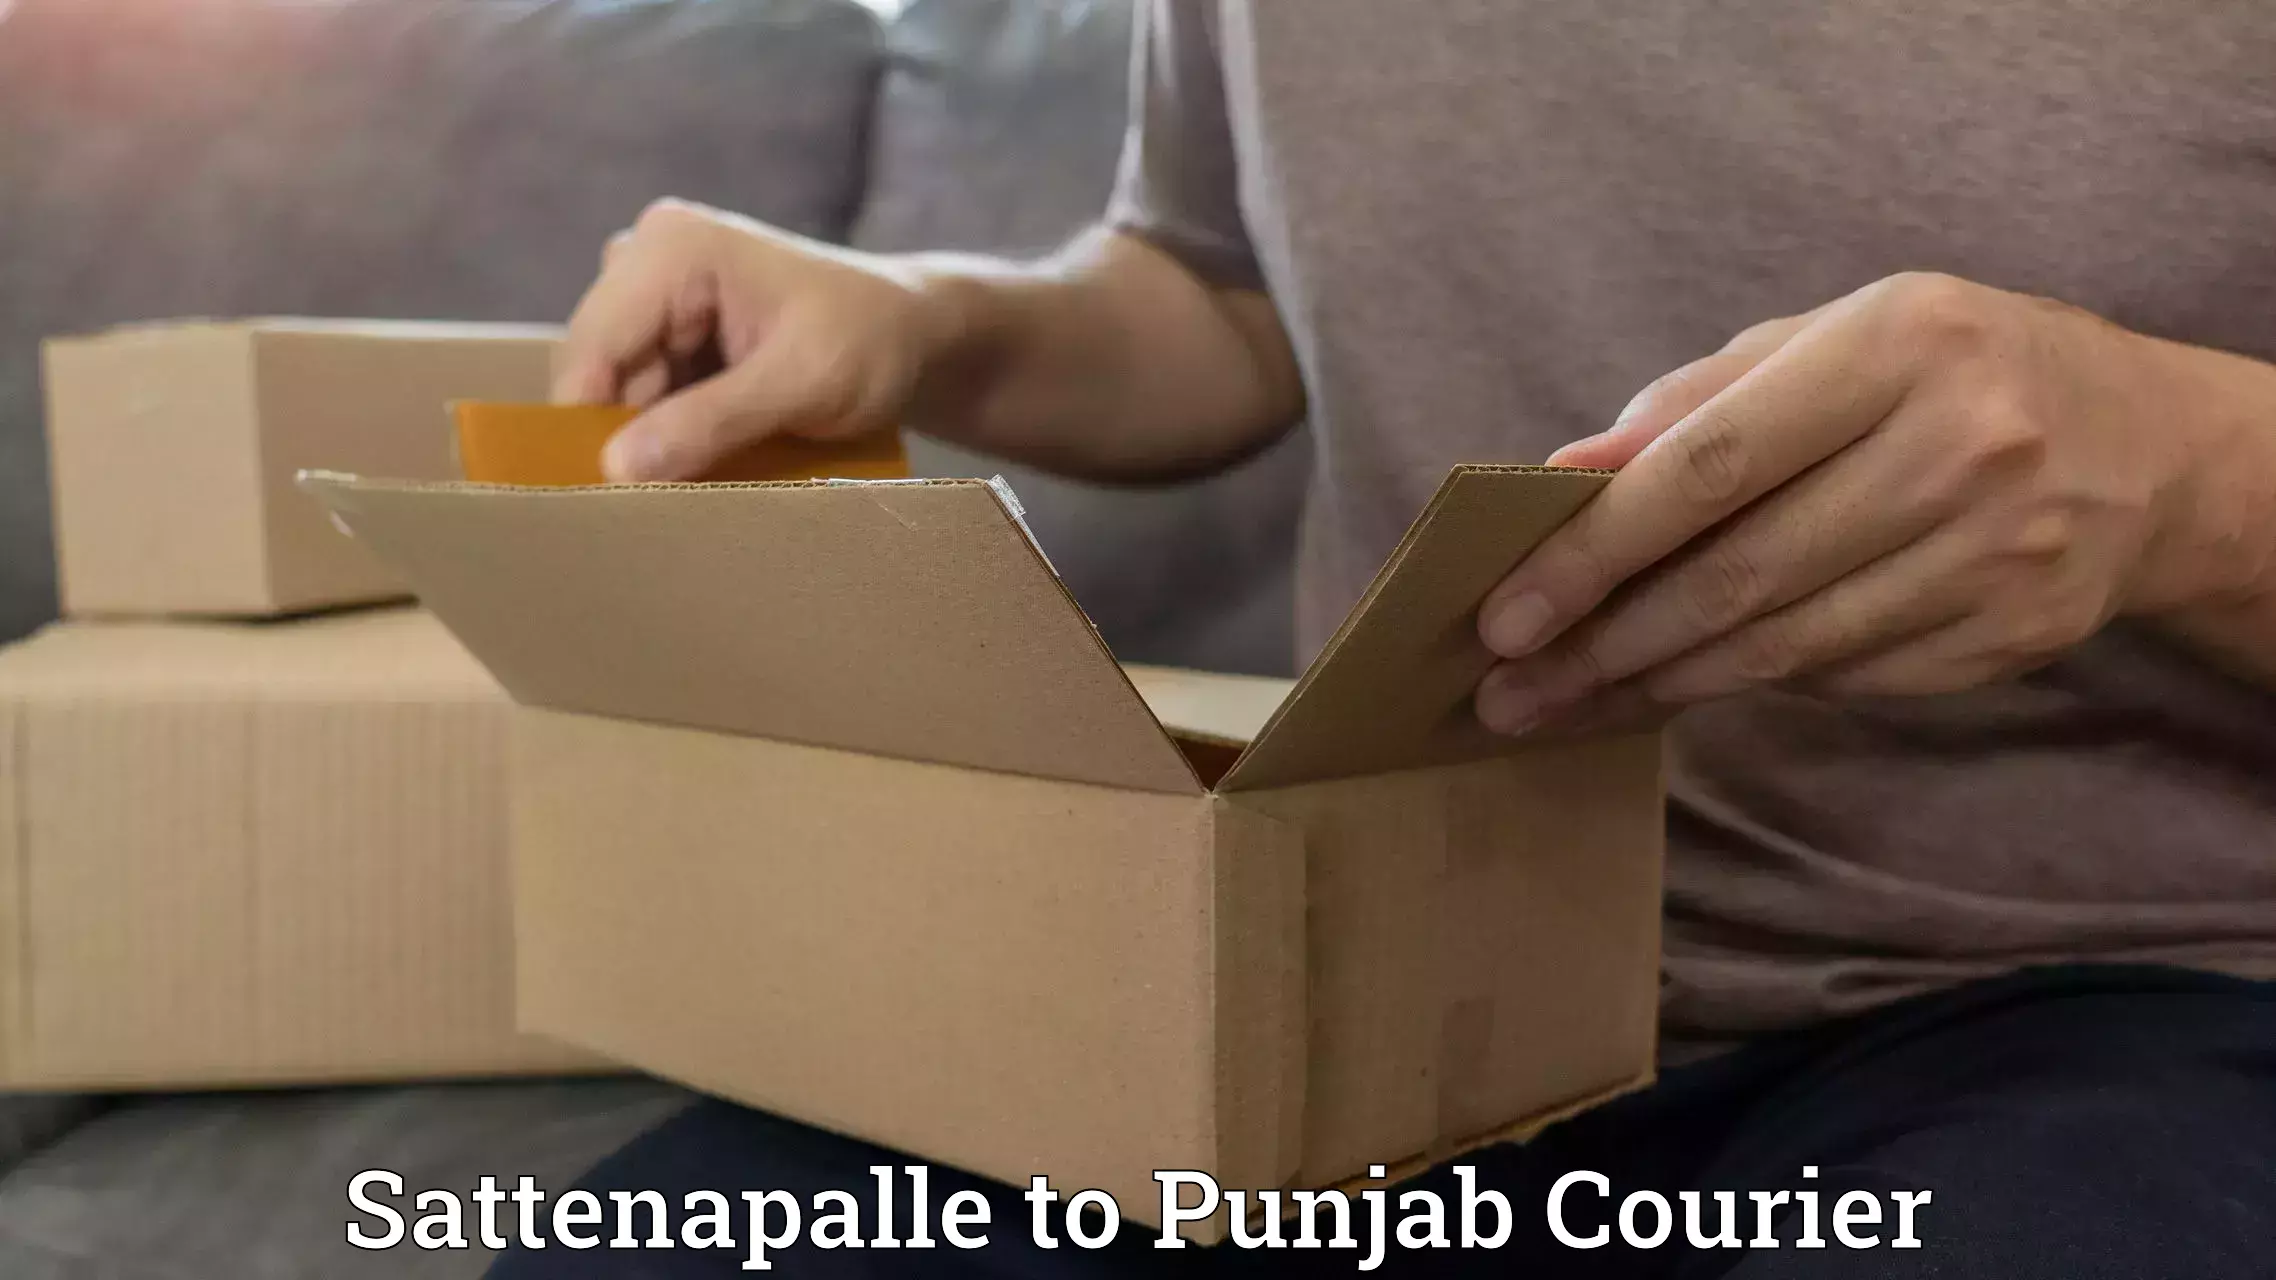 Customer-centric shipping Sattenapalle to Khanna